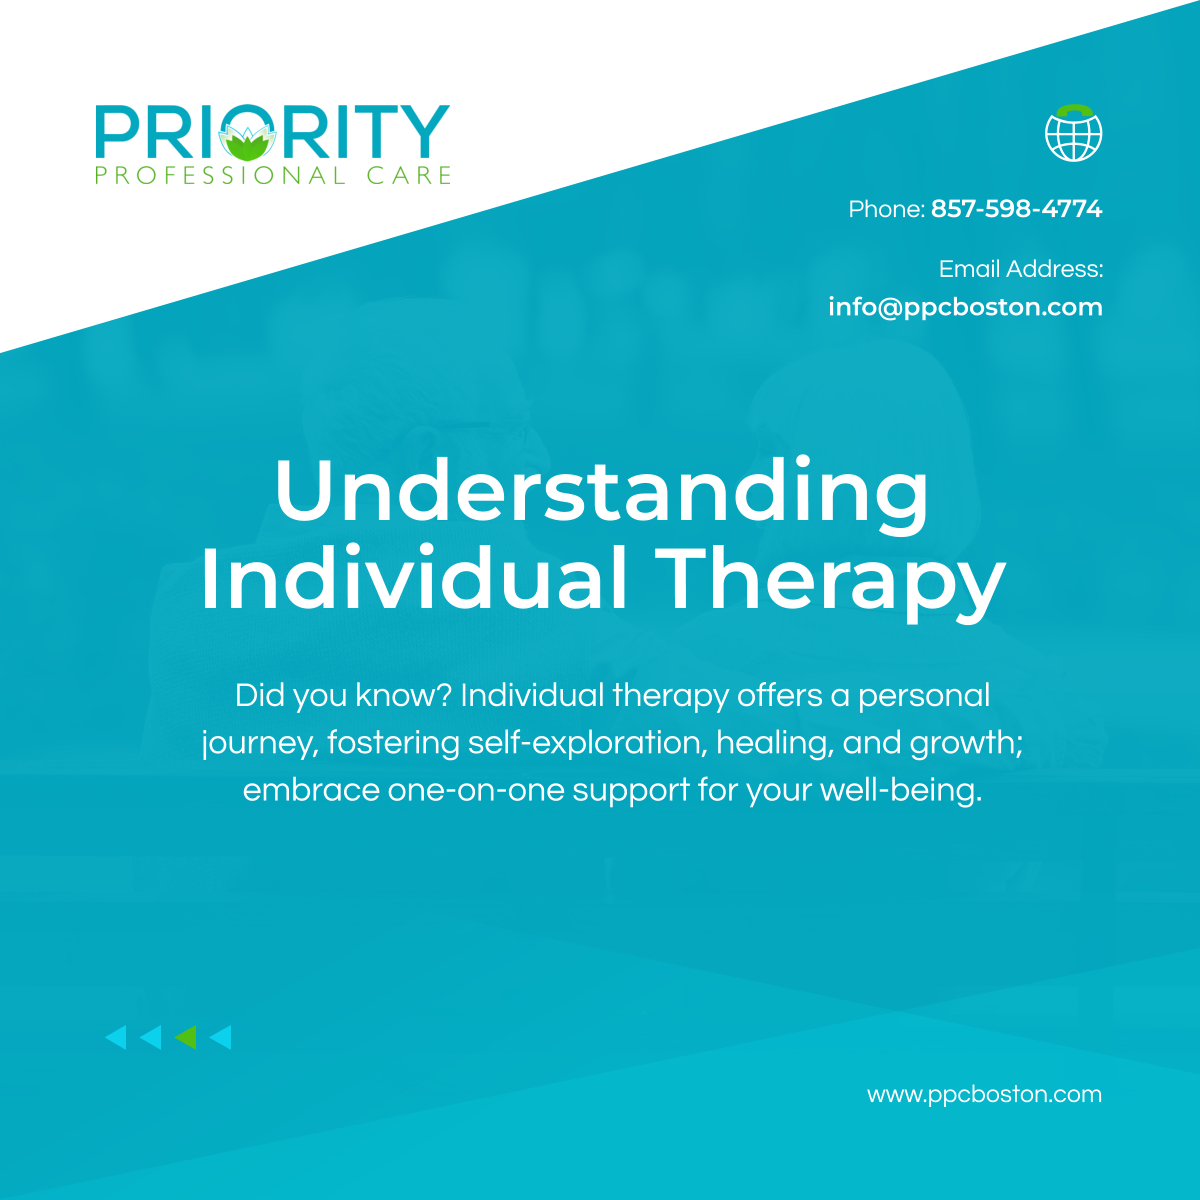 Dive into the personalized journey of individual therapy. It's a safe space for self-exploration, healing, and growth. Embrace the power of one-on-one support on your path to well-being.

#BostonMA #MentalHealthCare #AdultFosterCare #IndividualTherapy